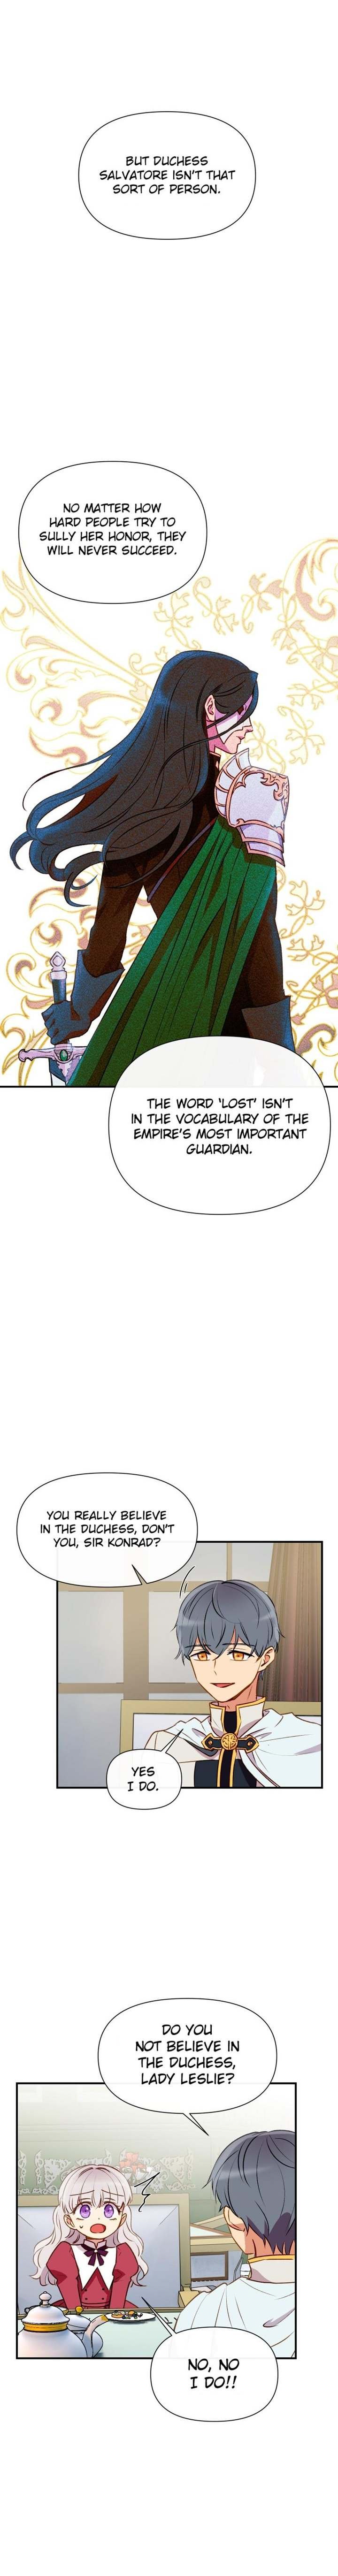 the-monster-duchess-and-contract-princess-chap-33-14